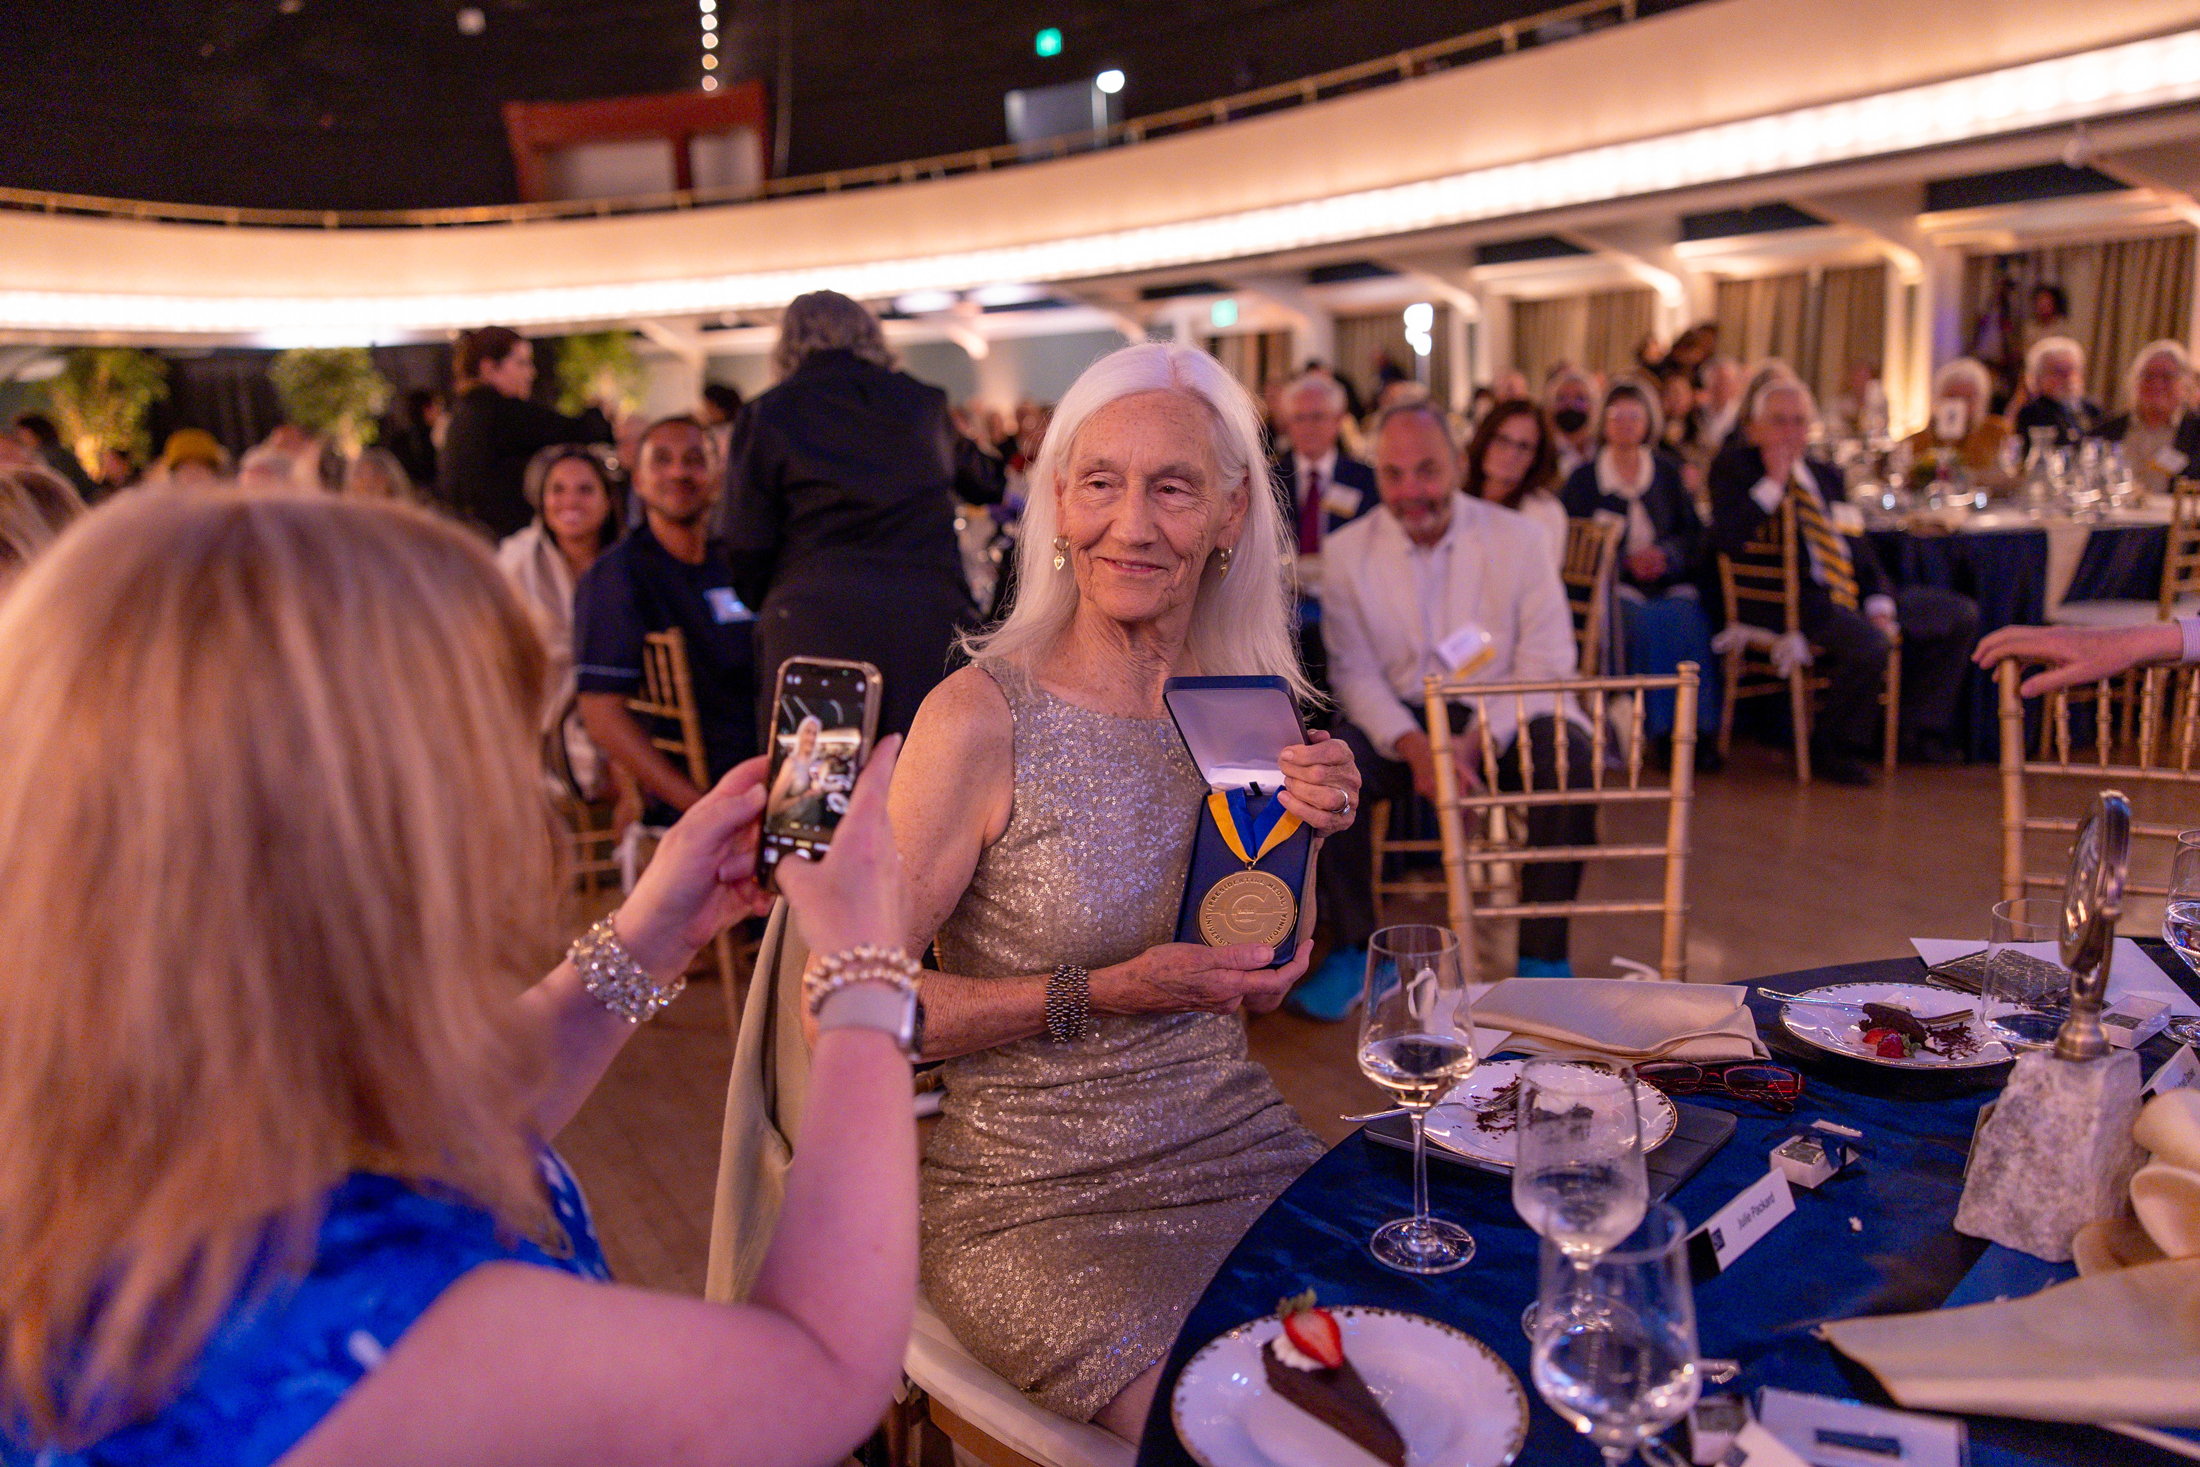 Julie Packard displays the UC Presidential Medal at a dinner table in a crowded banquet hall